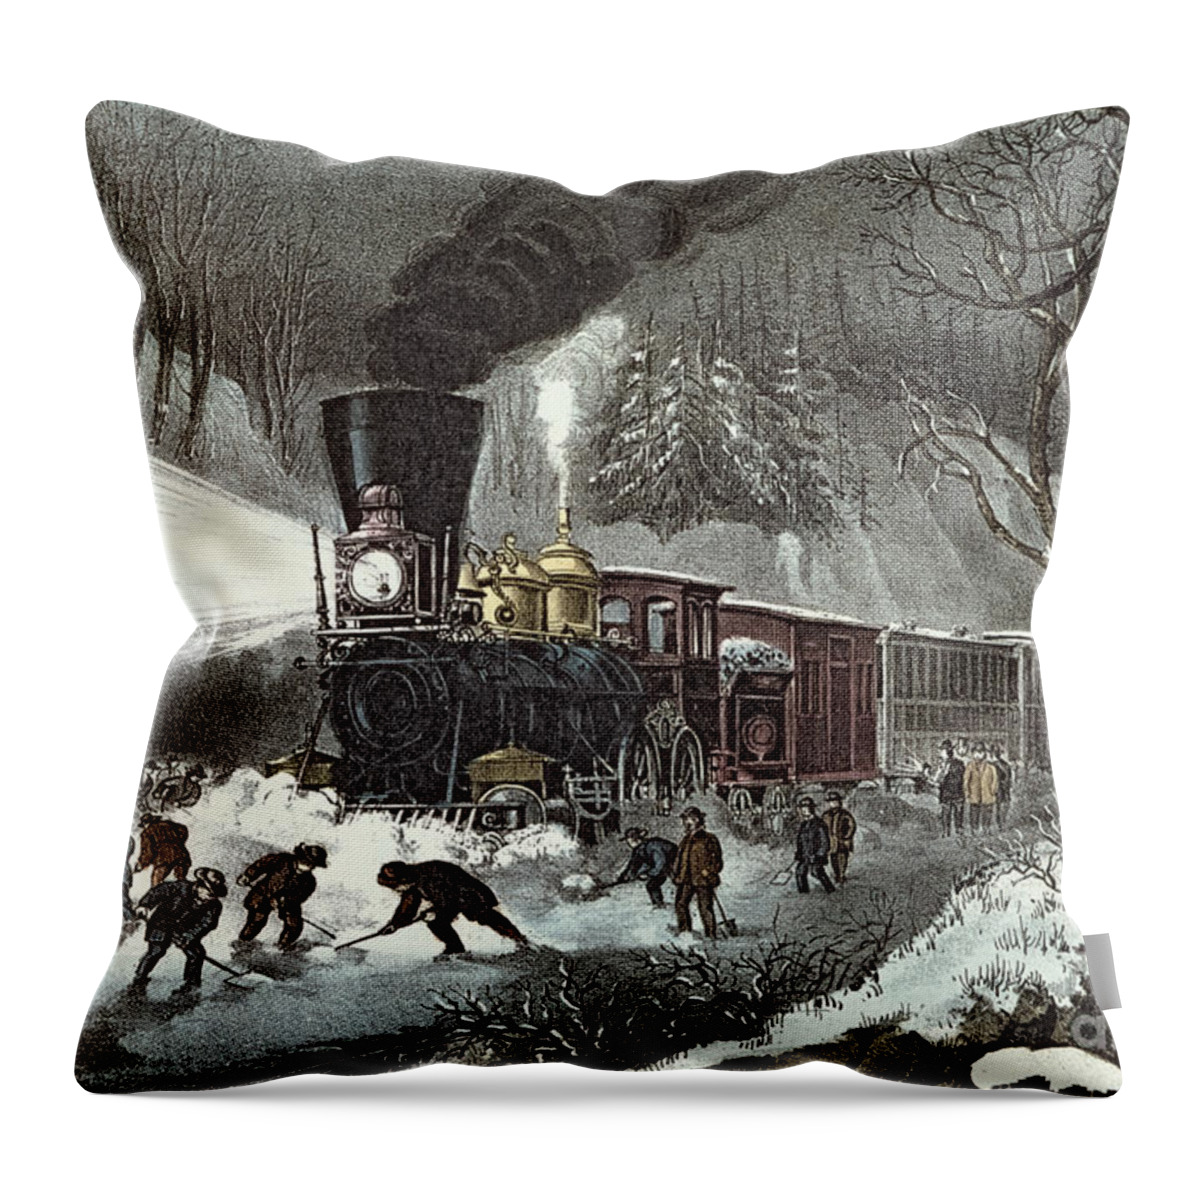 American Throw Pillow featuring the painting Currier and Ives by American Railroad Scene